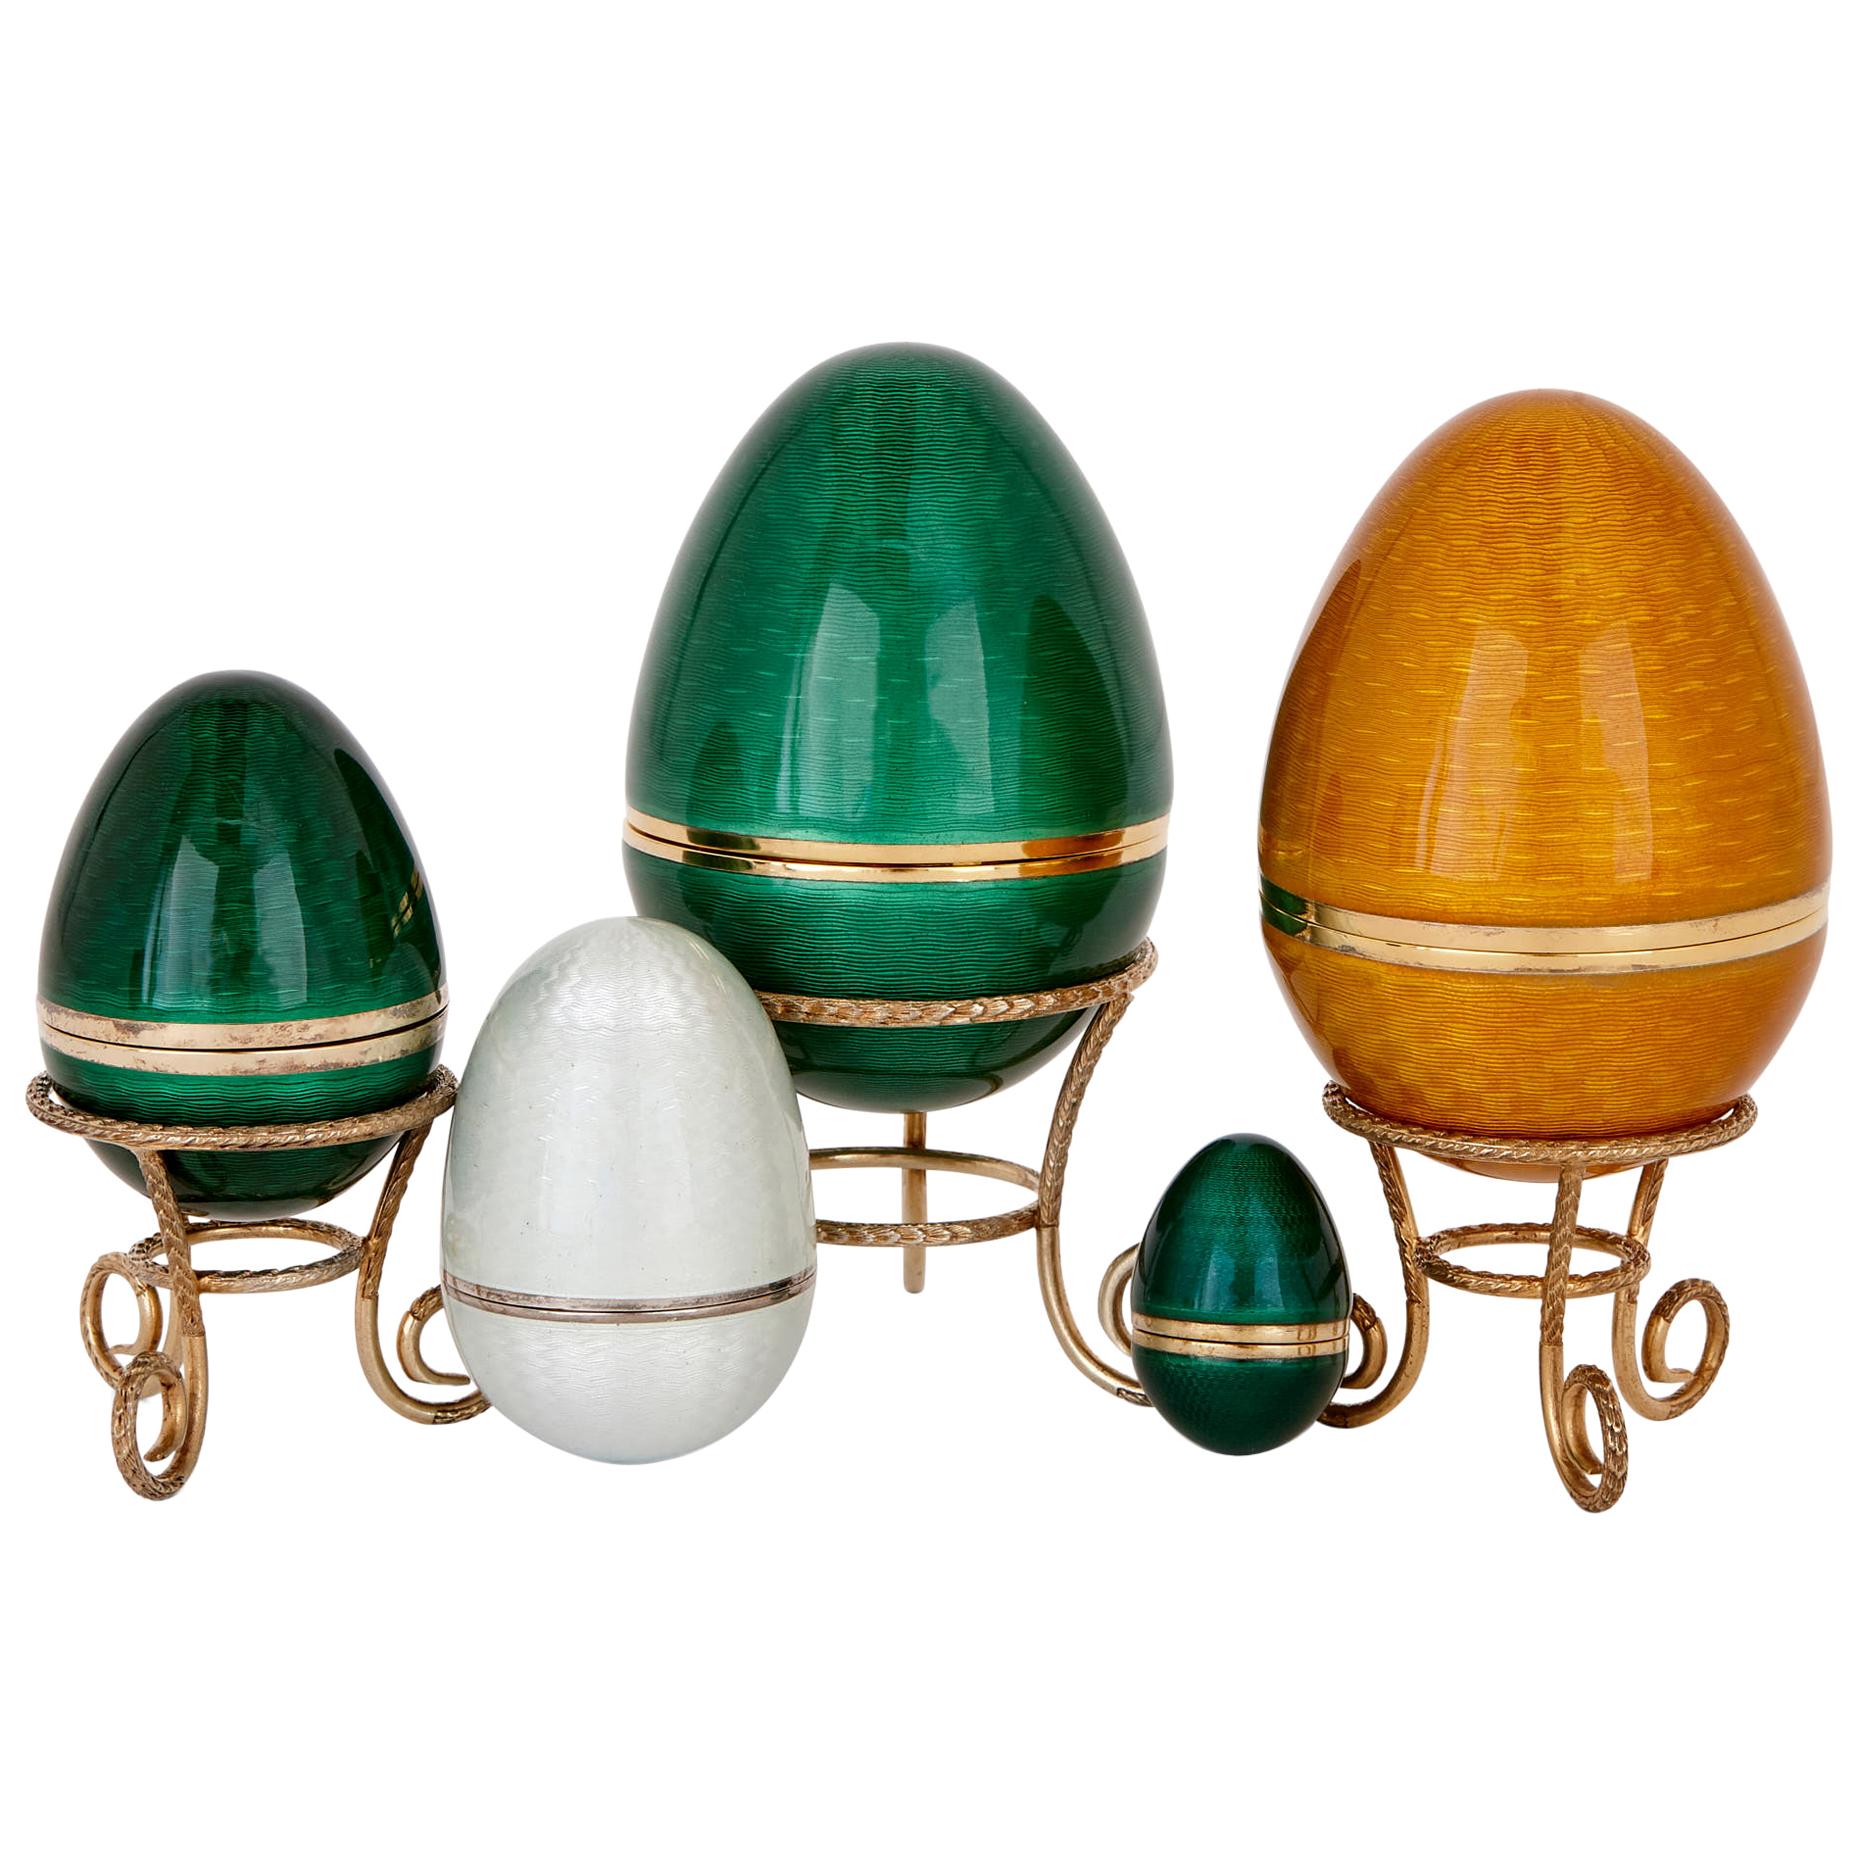 Set of Five Silver, Silver-Gilt and Guilloché Enamel Egg Containers